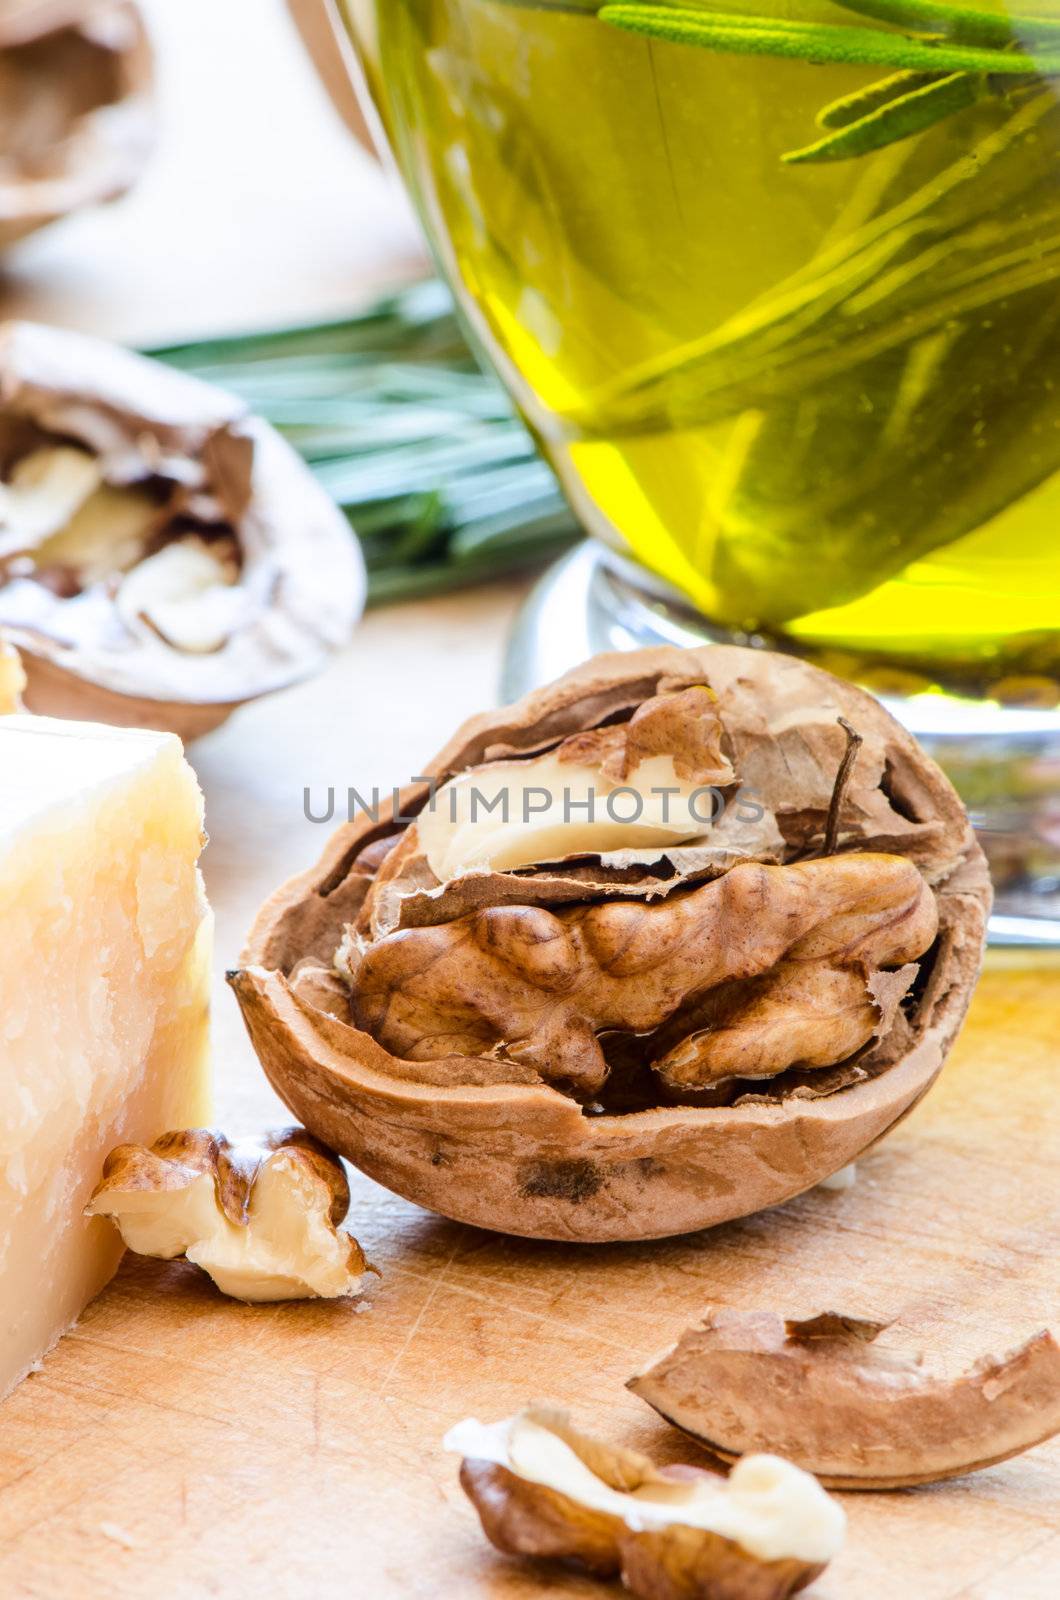 nut and olive oil by Nanisimova